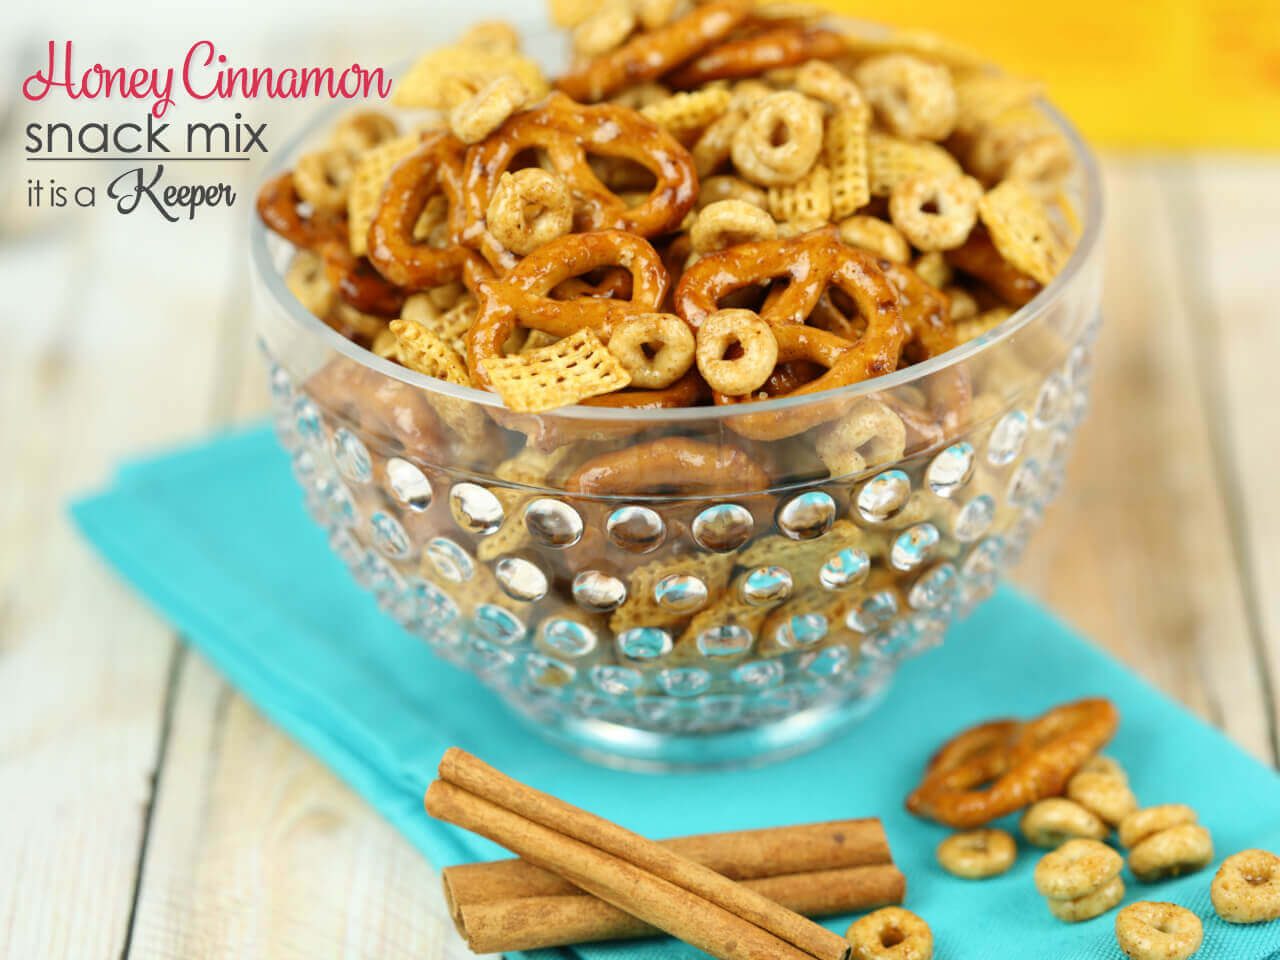 Honey Cinnamon Snack Mix in a clear bowl with a light blue napkin.